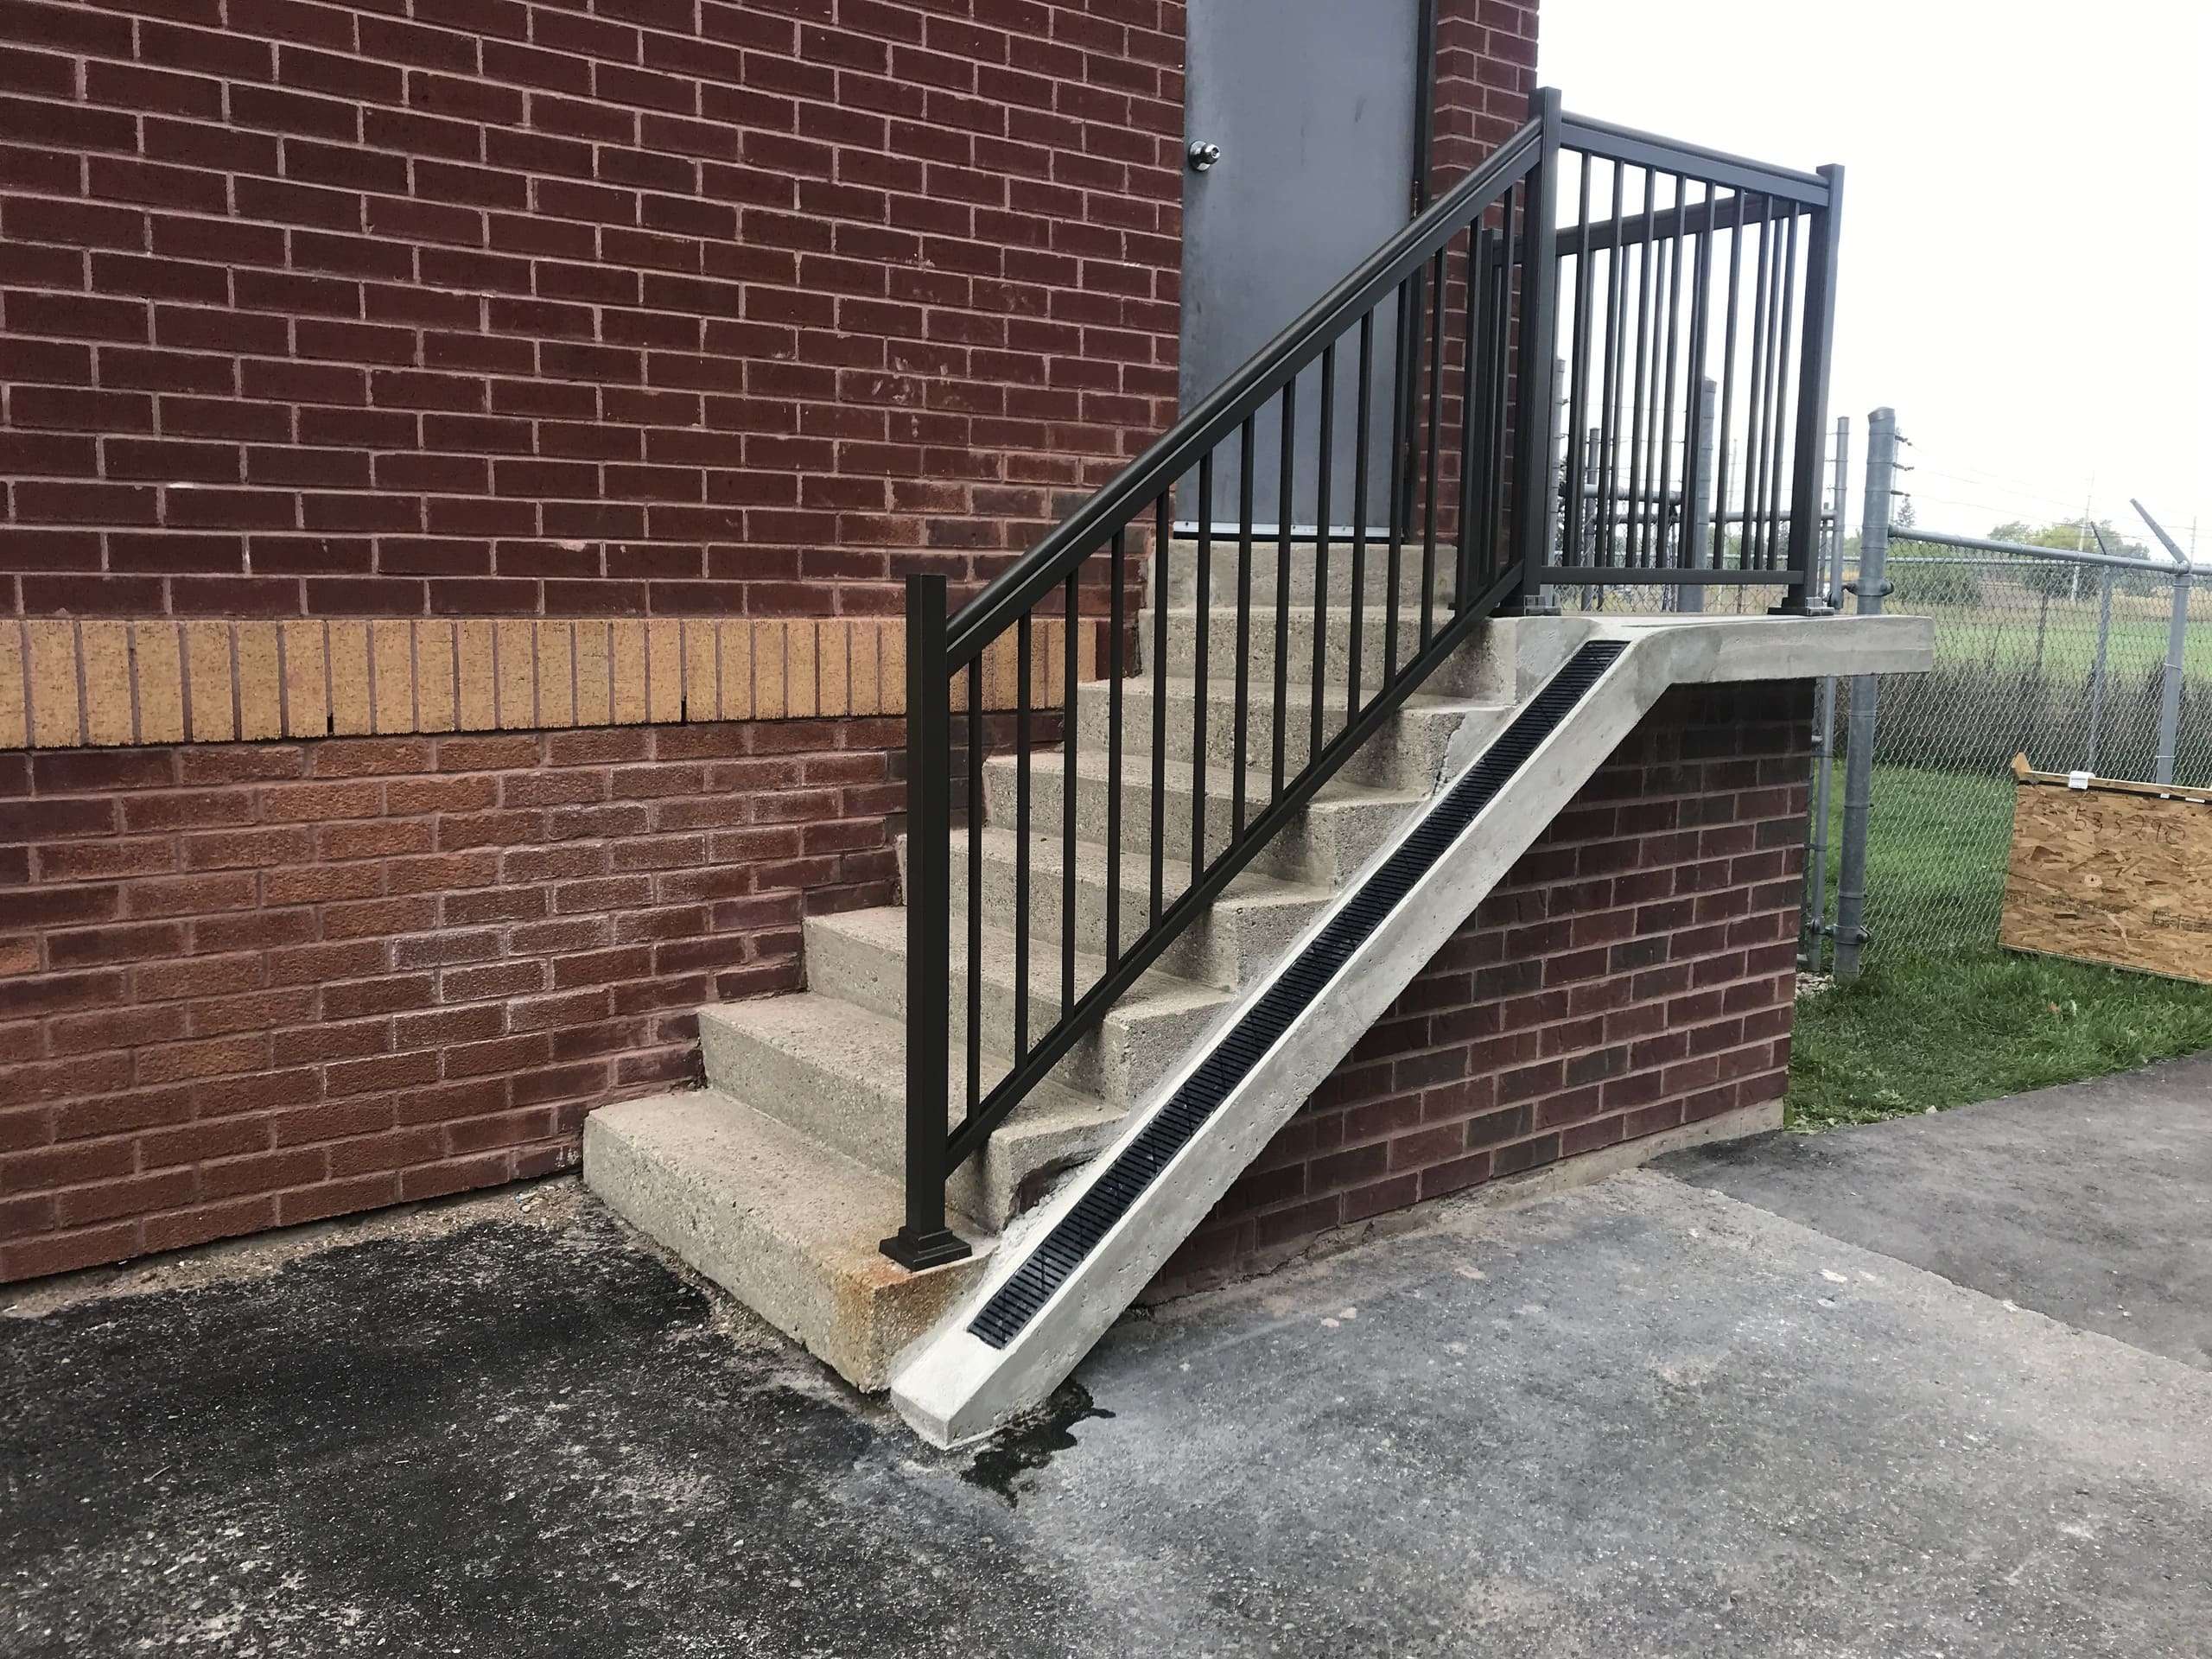 Concrete Water Channel & GREY Aluminum Railings Installation on Stair (Acton, ON)